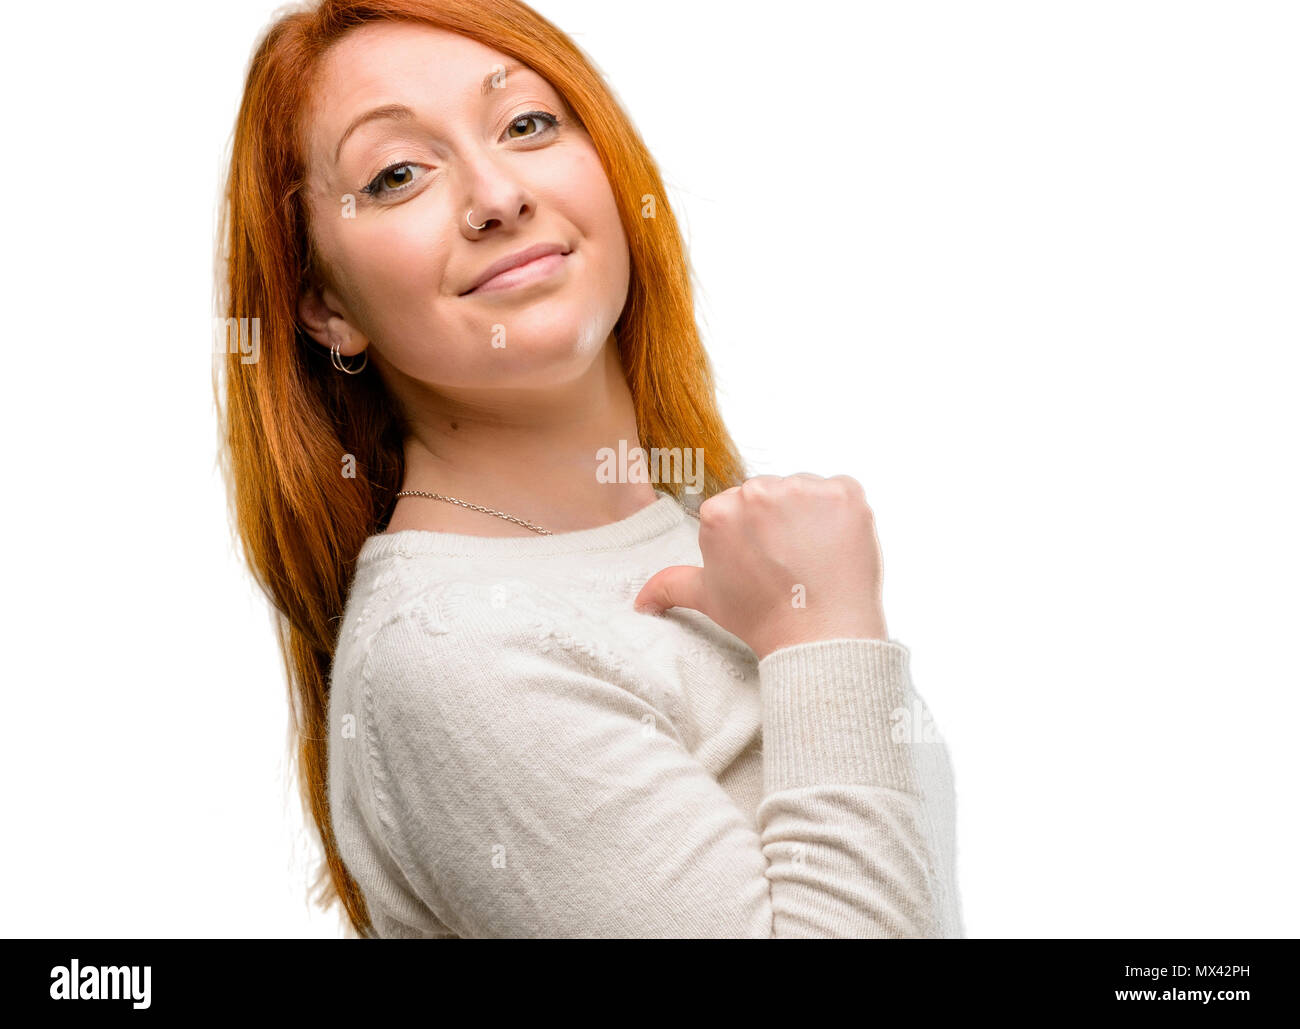 Beautiful young redhead woman proud, excited and arrogant, pointing with victory face isolated over white background Stock Photo